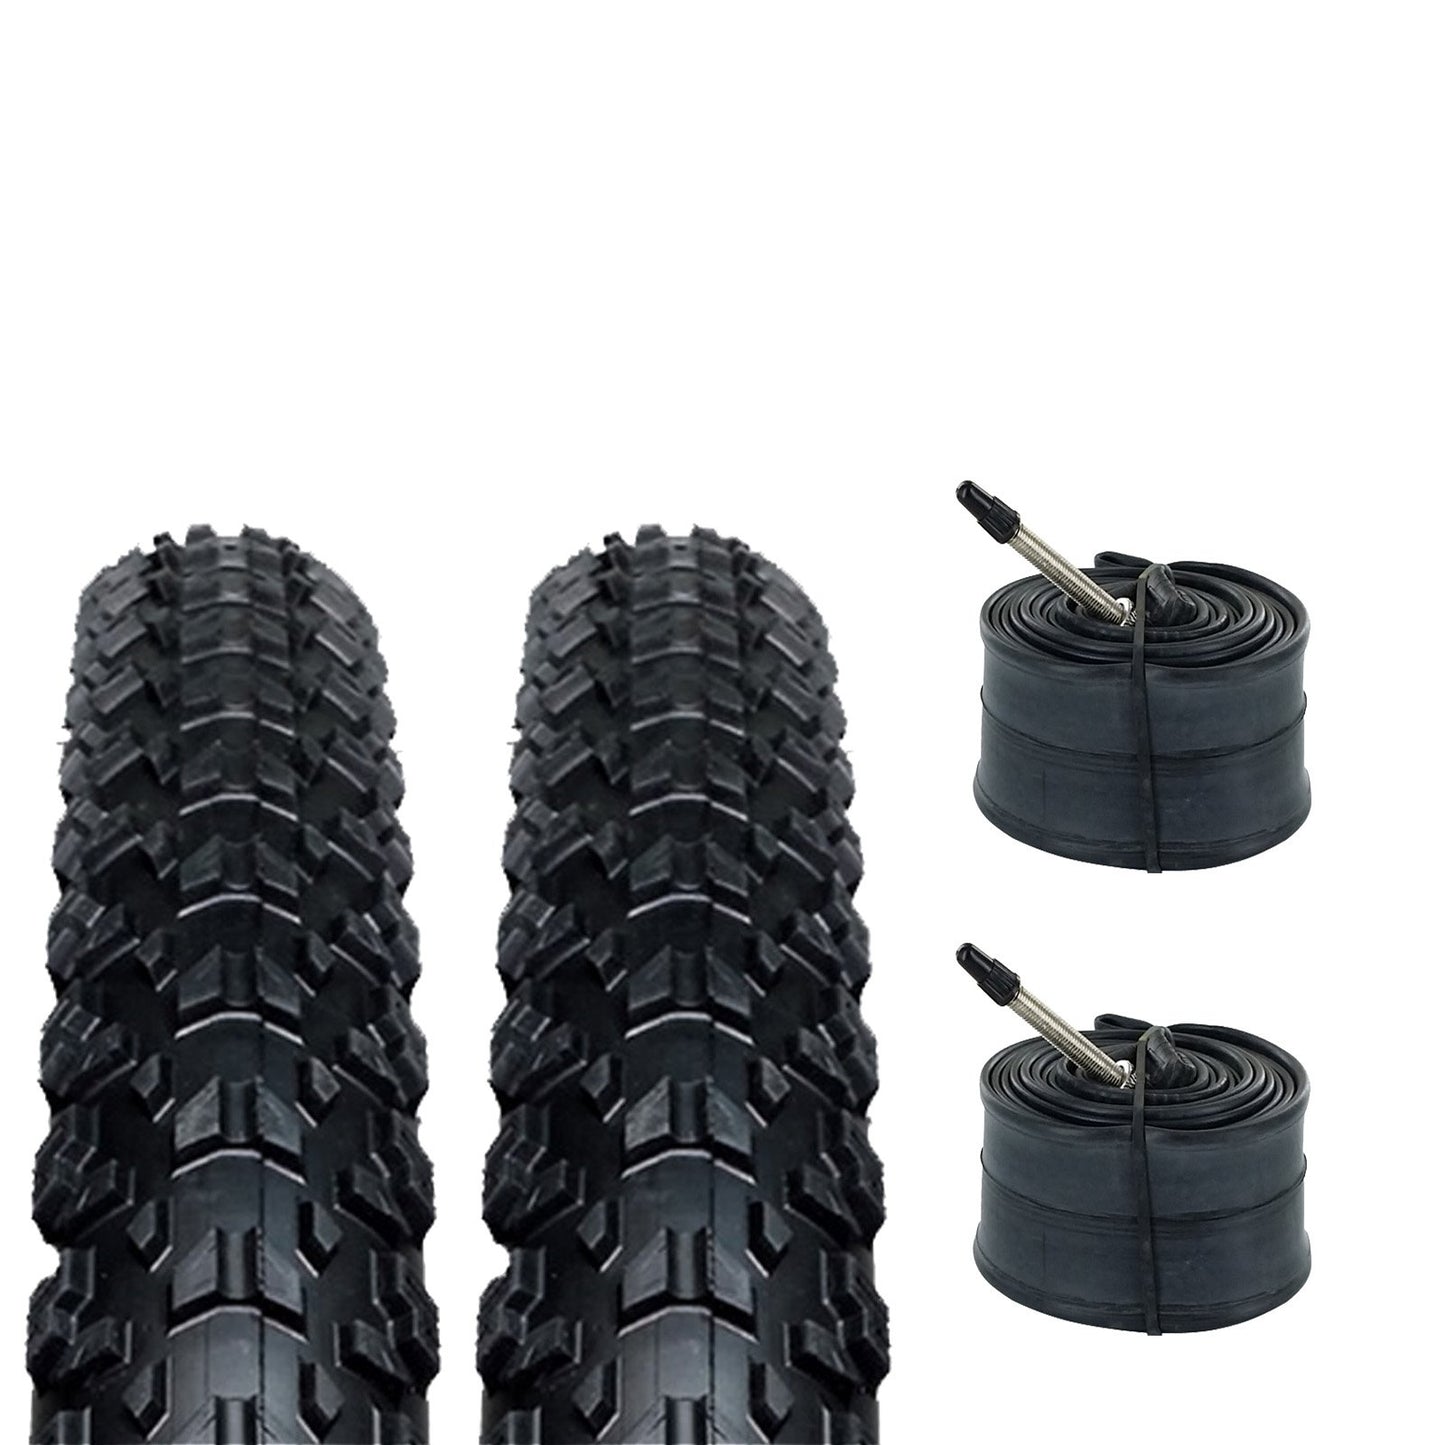 ZOL Bundle Pack Z2018 MTB Tires and Tube 26x2.25, Presta/French 48 MM Valve - Zol Cycling